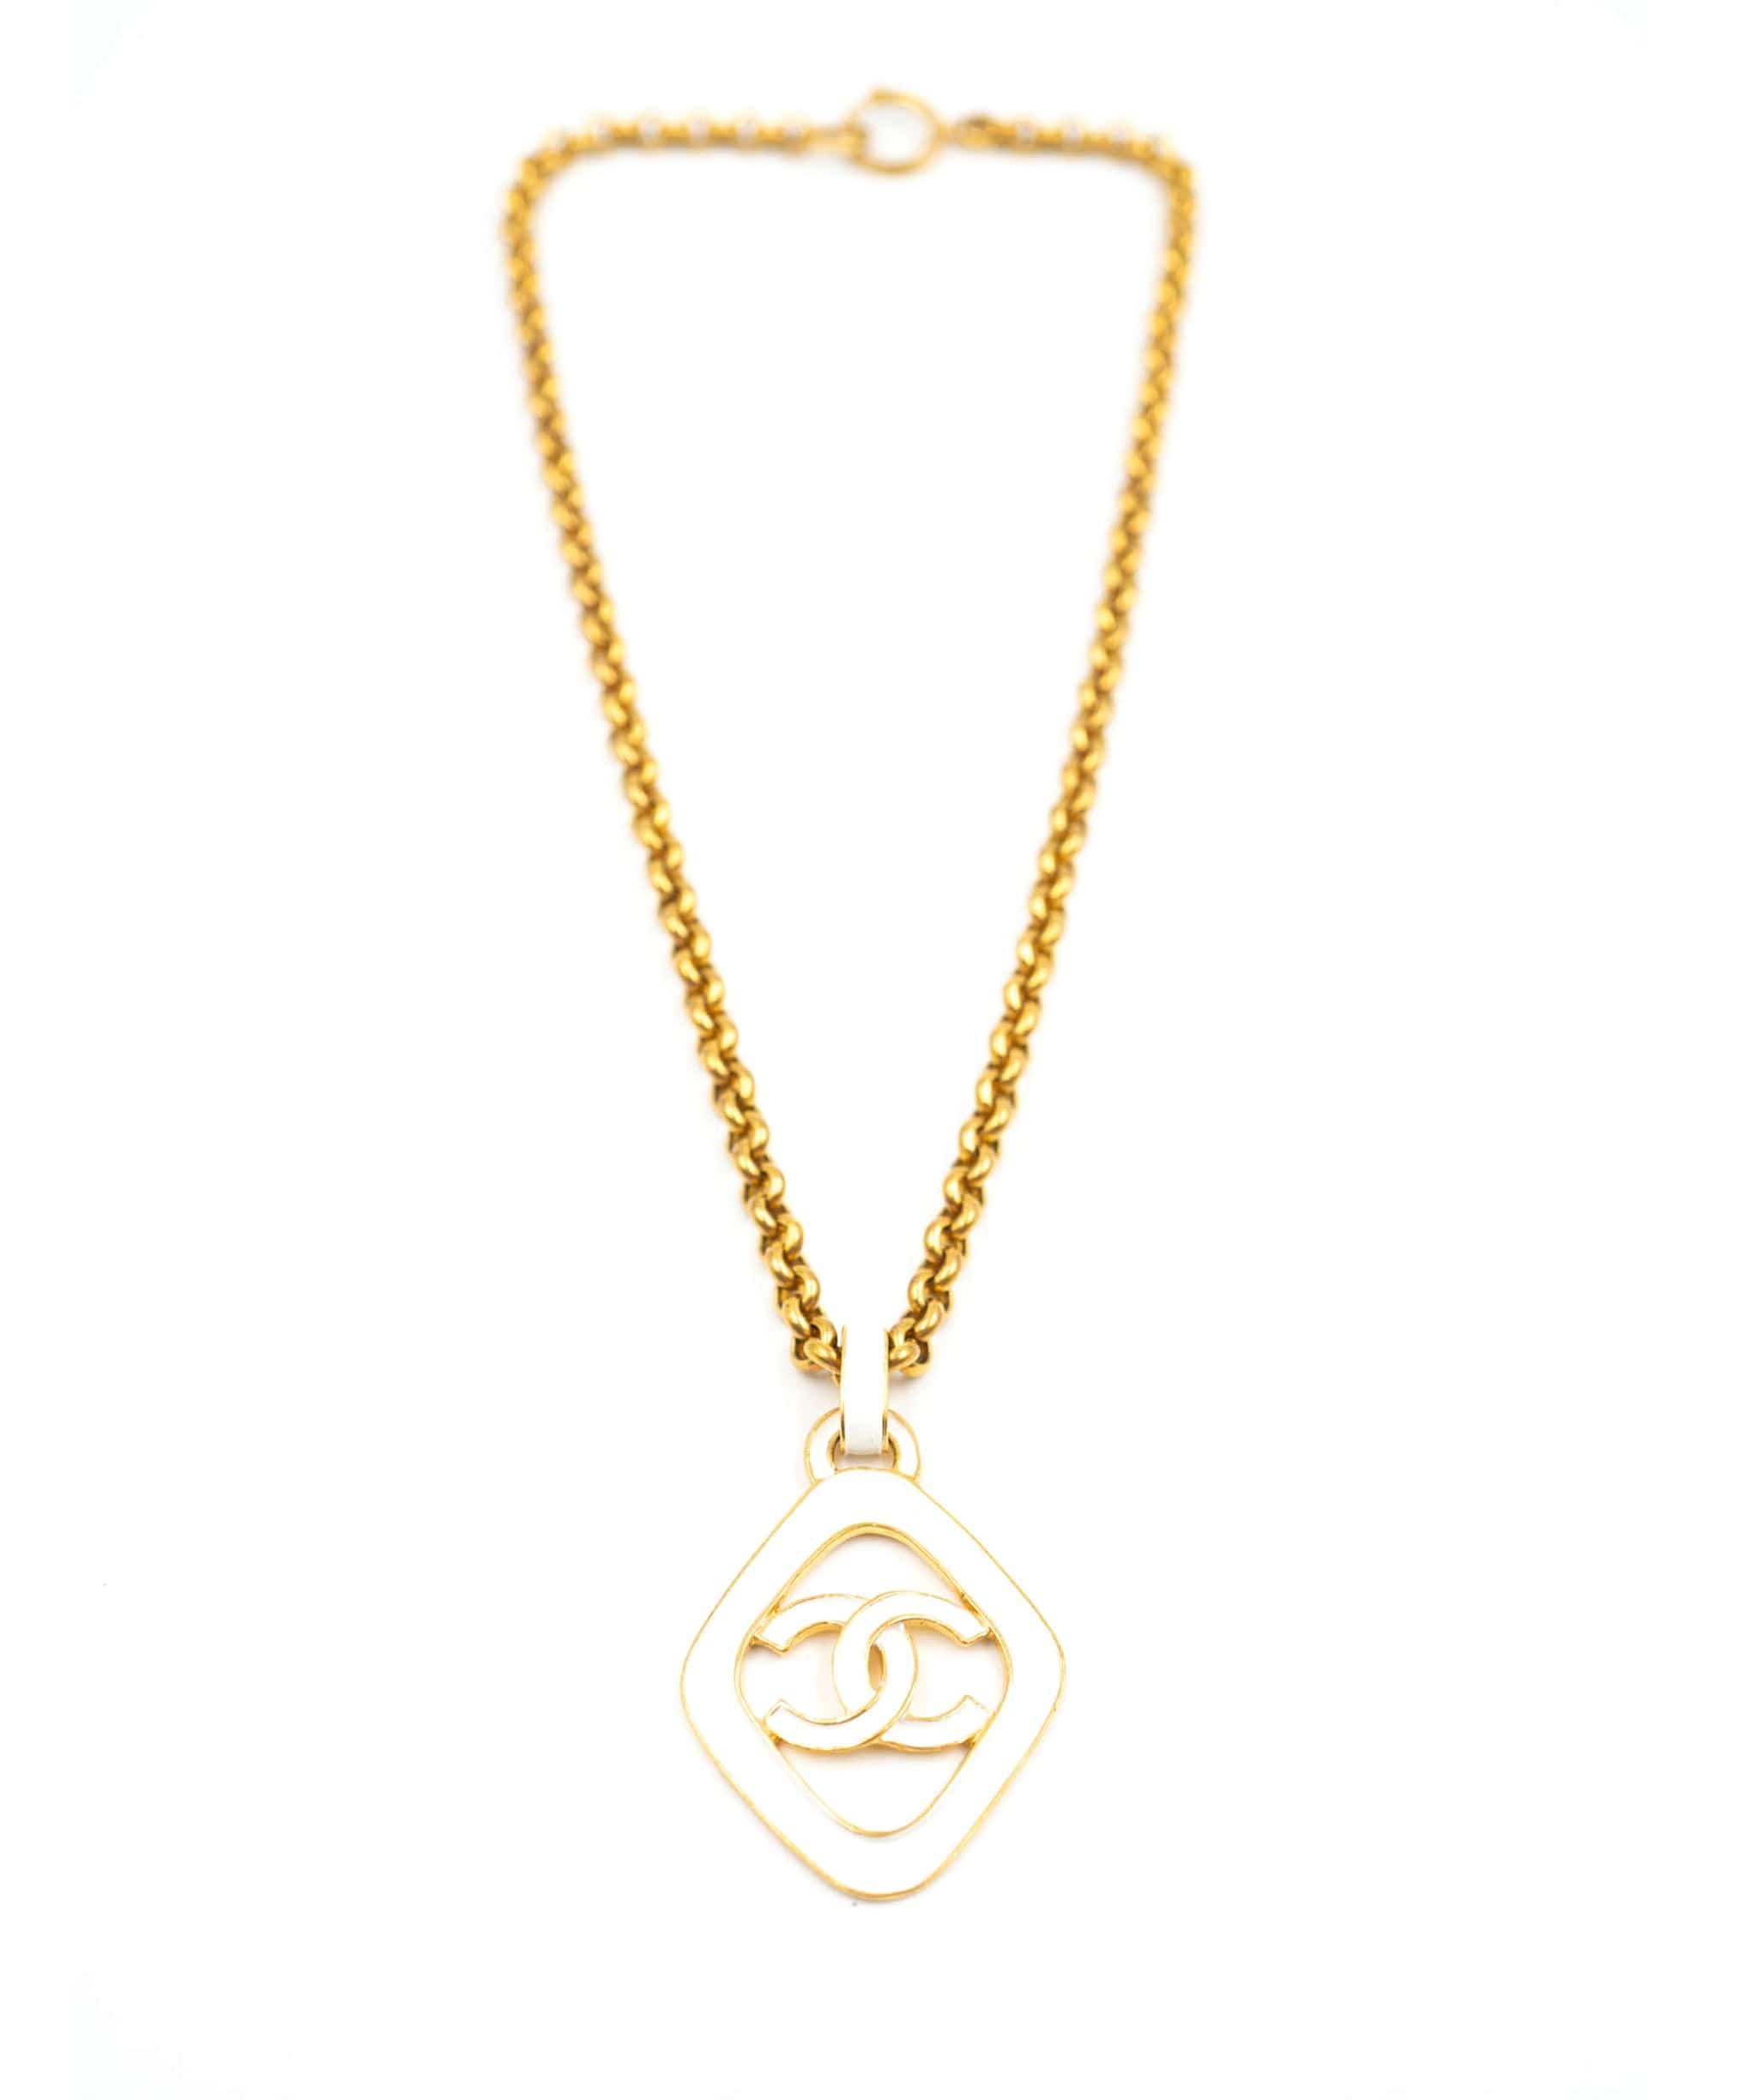 Vintage Chanel chain necklace with white enamel CC logo pendant, from –  LuxuryPromise